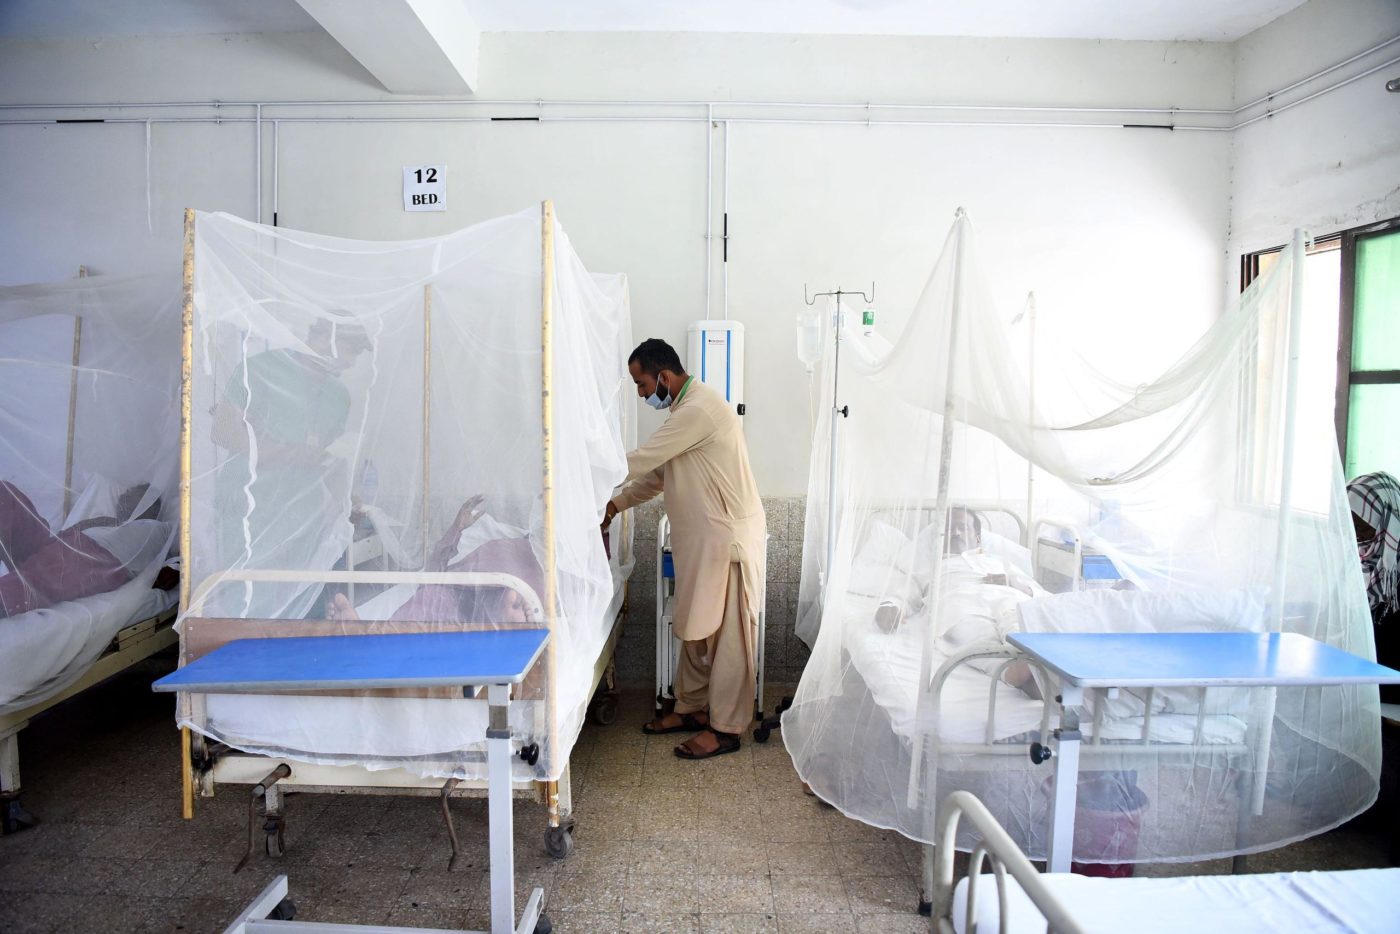 Patients affected with dengue fever are treated inside mosquito nets at a hospital in Islamabad, capital of Pakistan on 15 September 2022. Pakistan's capital Islamabad has been facing a surge in dengue cases as 72 new cases were reported in the last 24 hours, amid an outbreak of the disease in the country, health authorities said. Photo: Ahmad Kamal / Xinhua / Alamy Live News